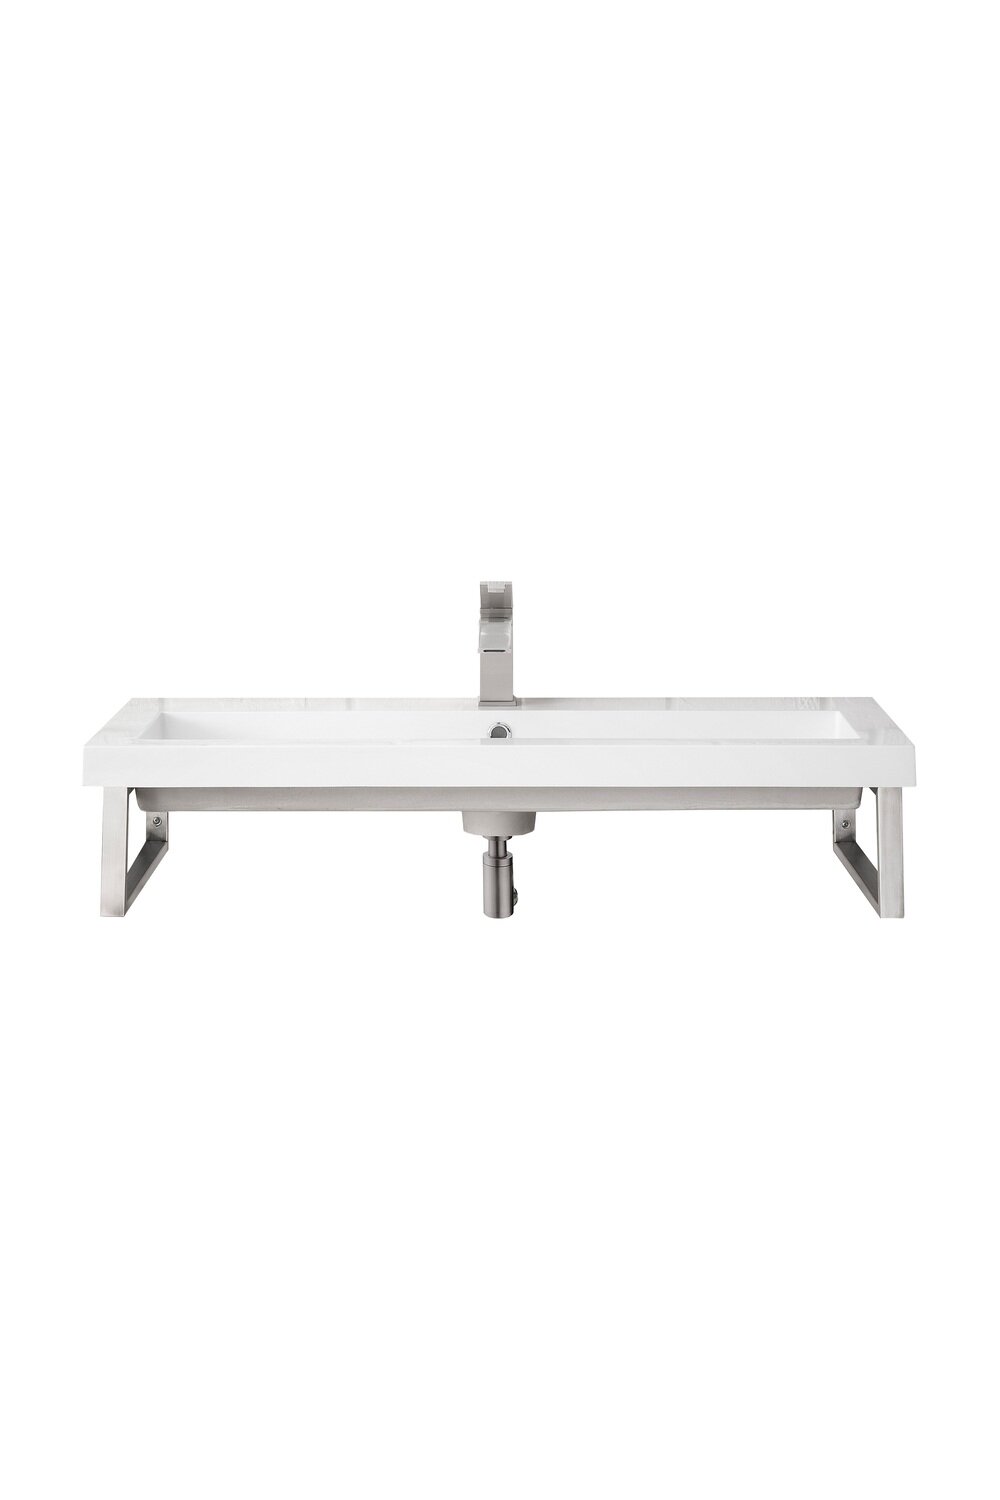 JAMES MARTIN - Two Boston 15.25&quot; Wall Brackets, Brushed Nickel w/ 39.5&quot; White Glossy Composite Stone Top 055BK16BNK39.5WG2